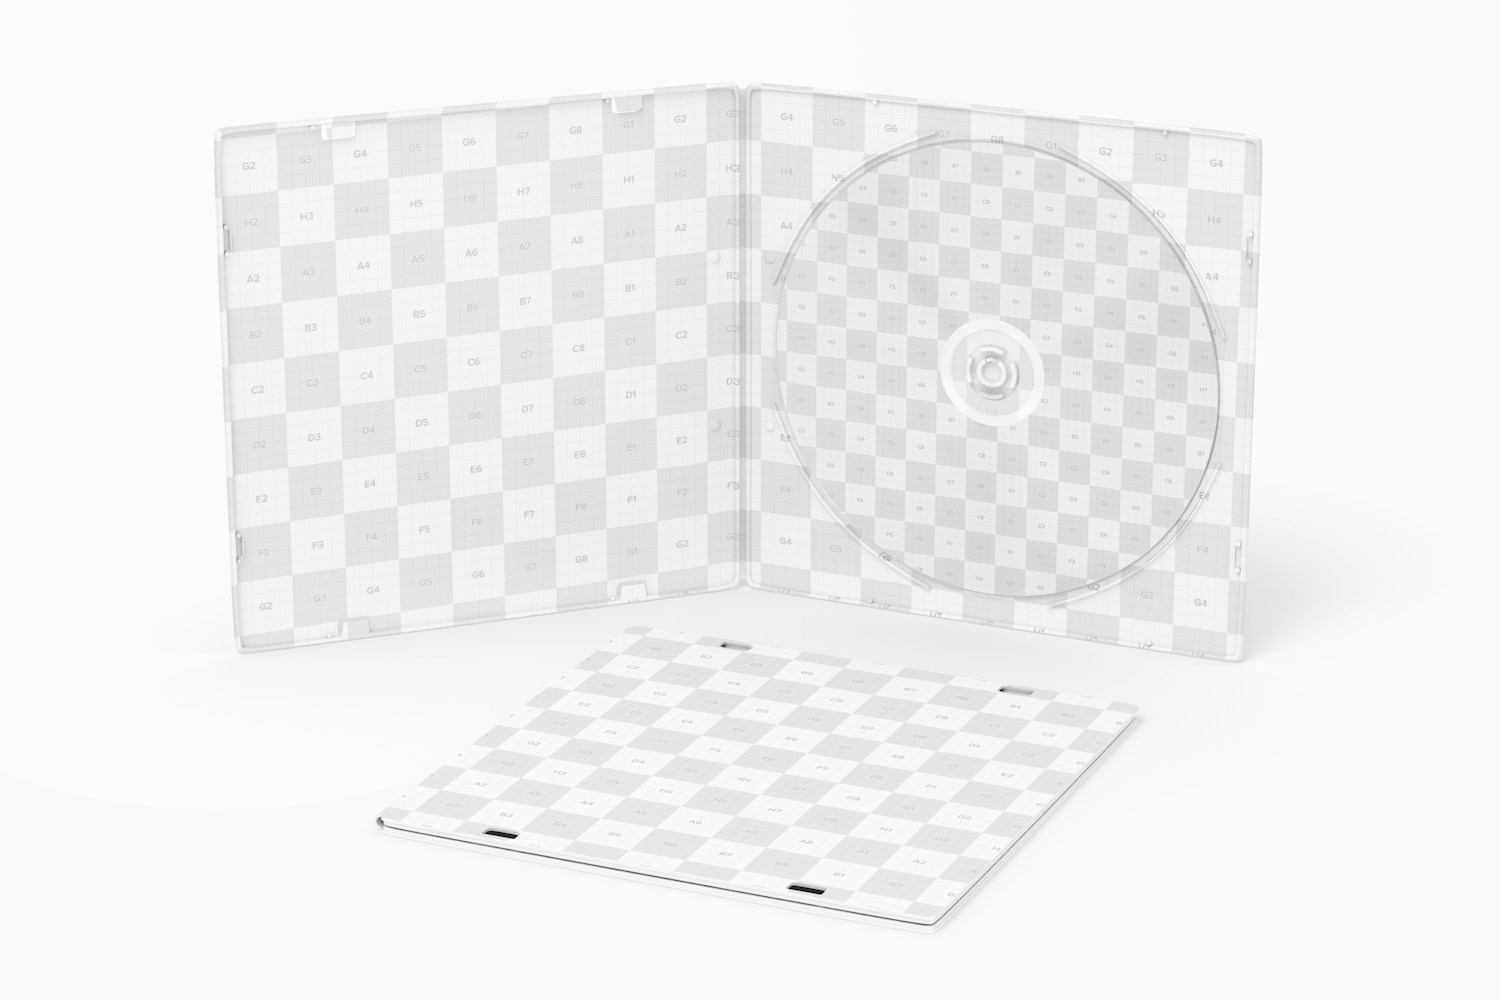 Squared Plastic CD Cases Mockup, Opened and Closed